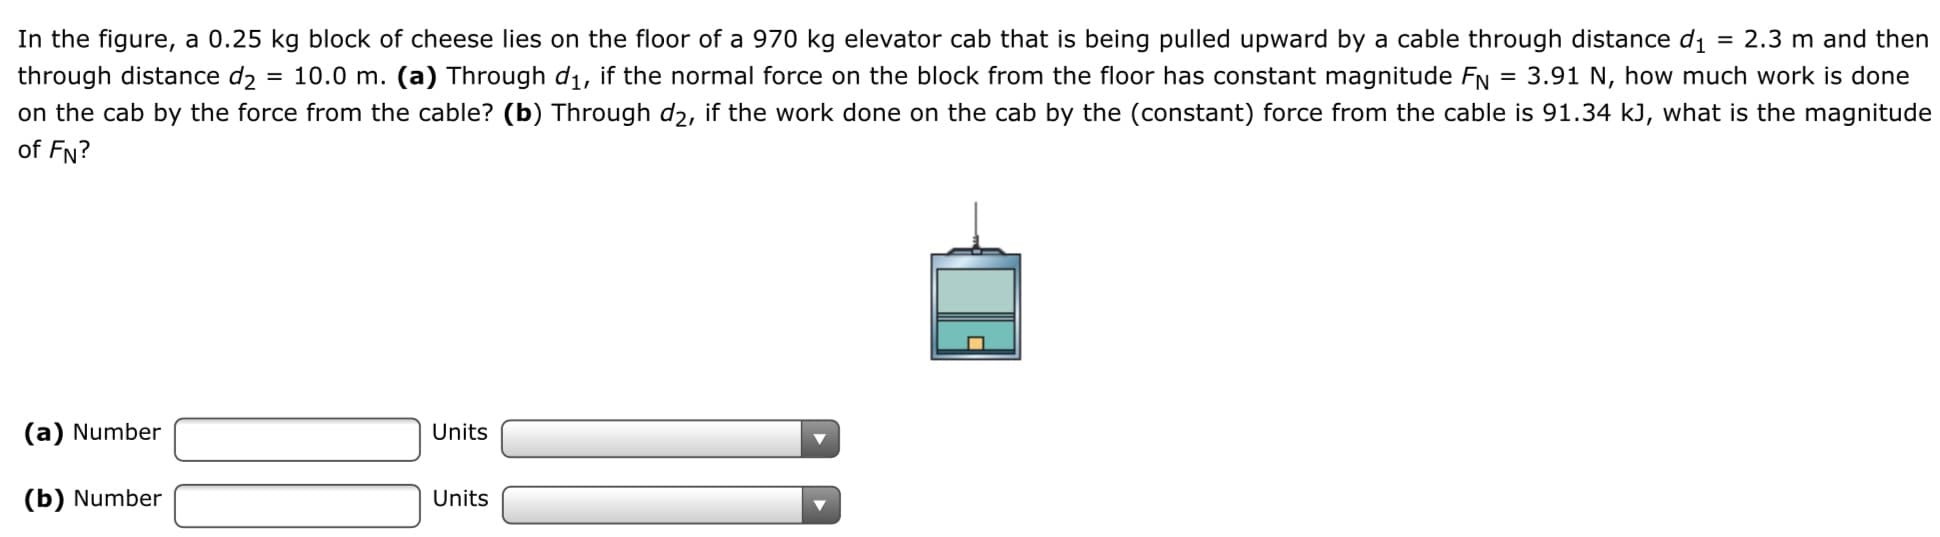 In the figure, a 0.25 kg block of cheese lies on the floor of a 970 kg elevator cab that is being pulled upward by a cable through distance di
= 2.3 m and then
10.0 m. (a) Through d1, if the normal force on the block from the floor has constant magnitude FN
= 3.91 N, how much work is done
through distance d2
on the cab by the force from the cable? (b) Through d2, if the work done on the cab by the (constant) force from the cable is 91.34 kJ, what is the magnitude
of FN?
(a) Number
Units
(b) Number
Units
